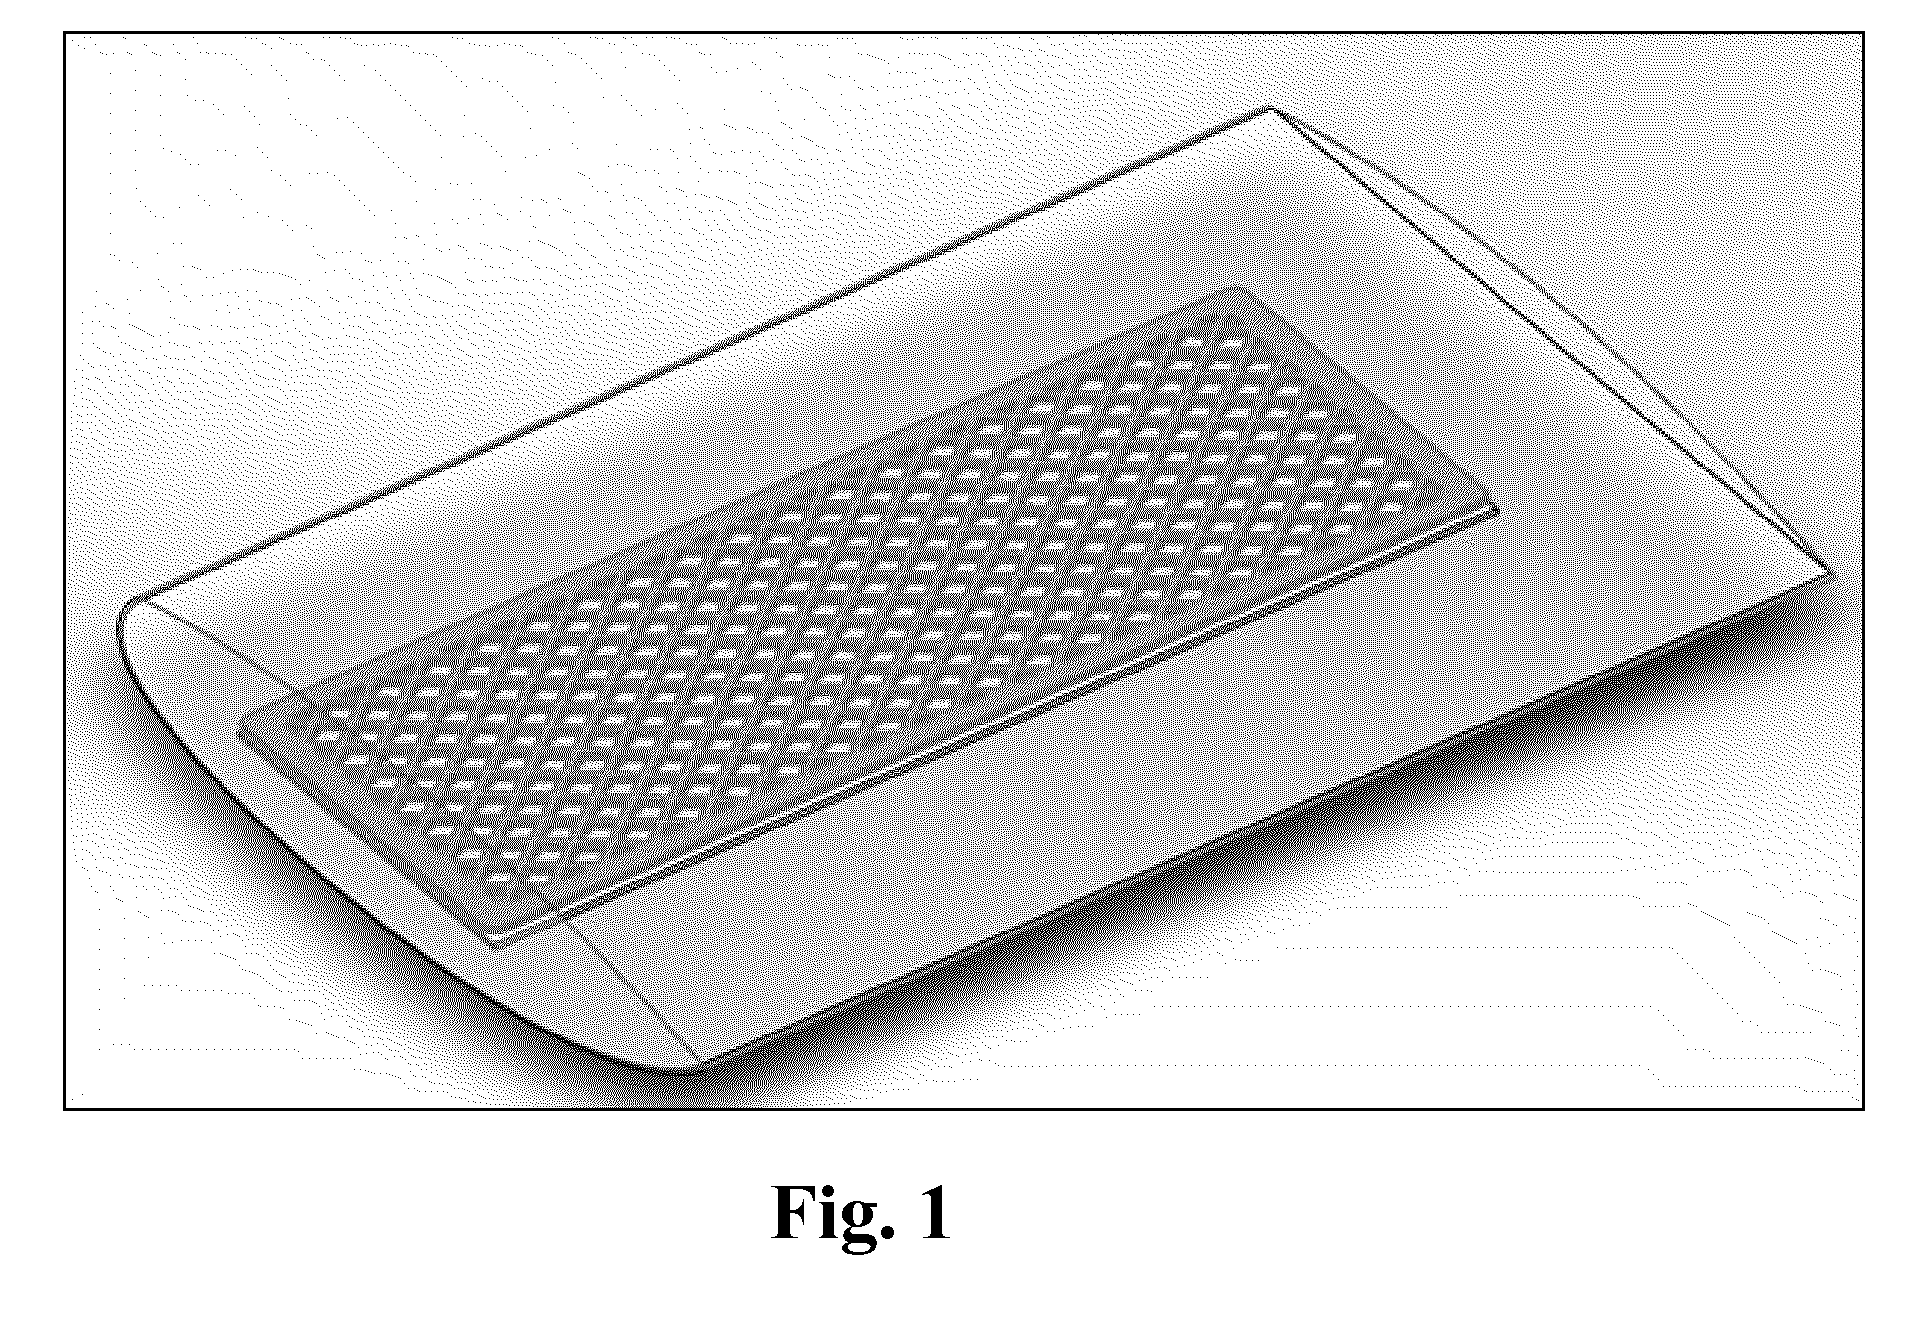 Fenestration kits for making fenestrated placental tissue allografts and methods of using the same